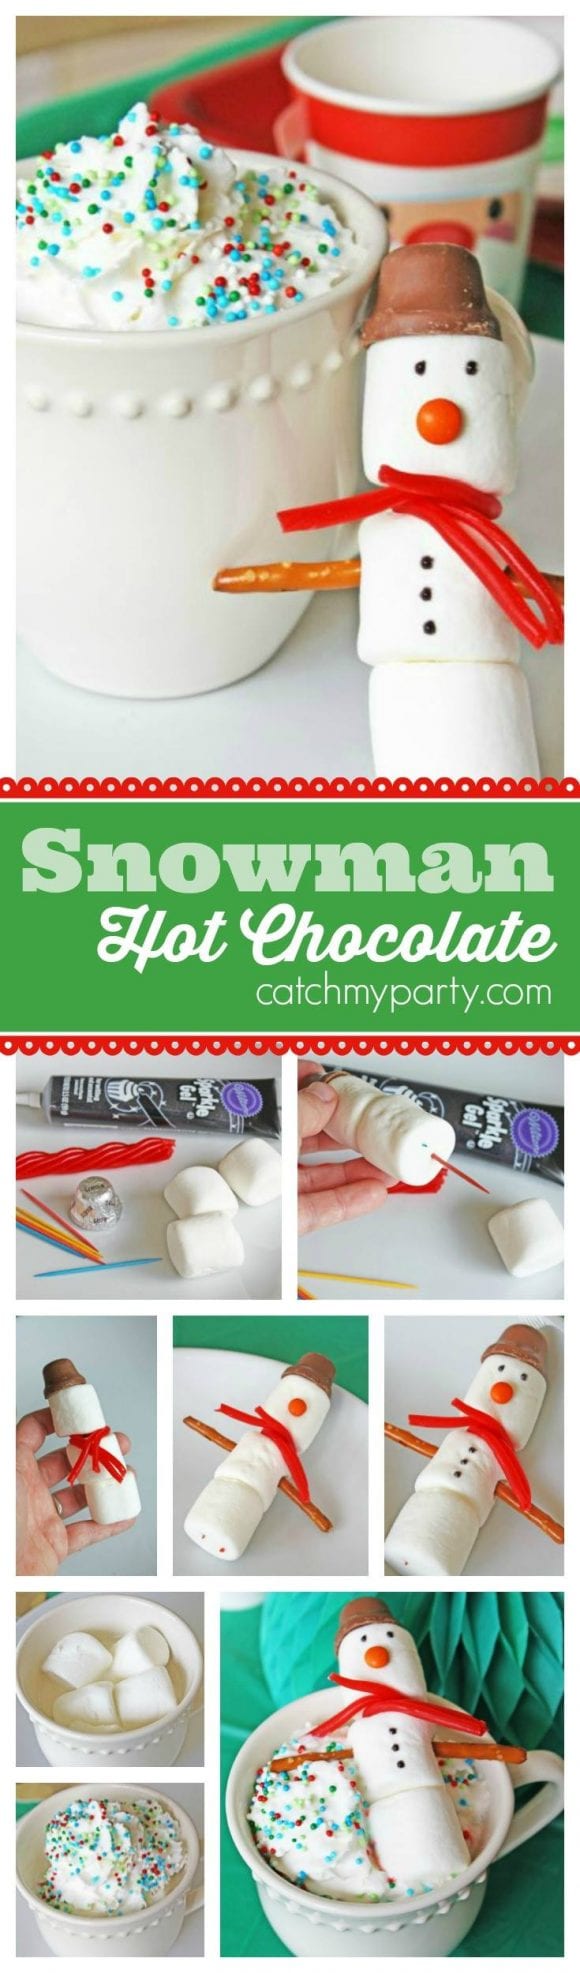 Marshmallow Snowman Hot Chocolate | CatchMyParty.com